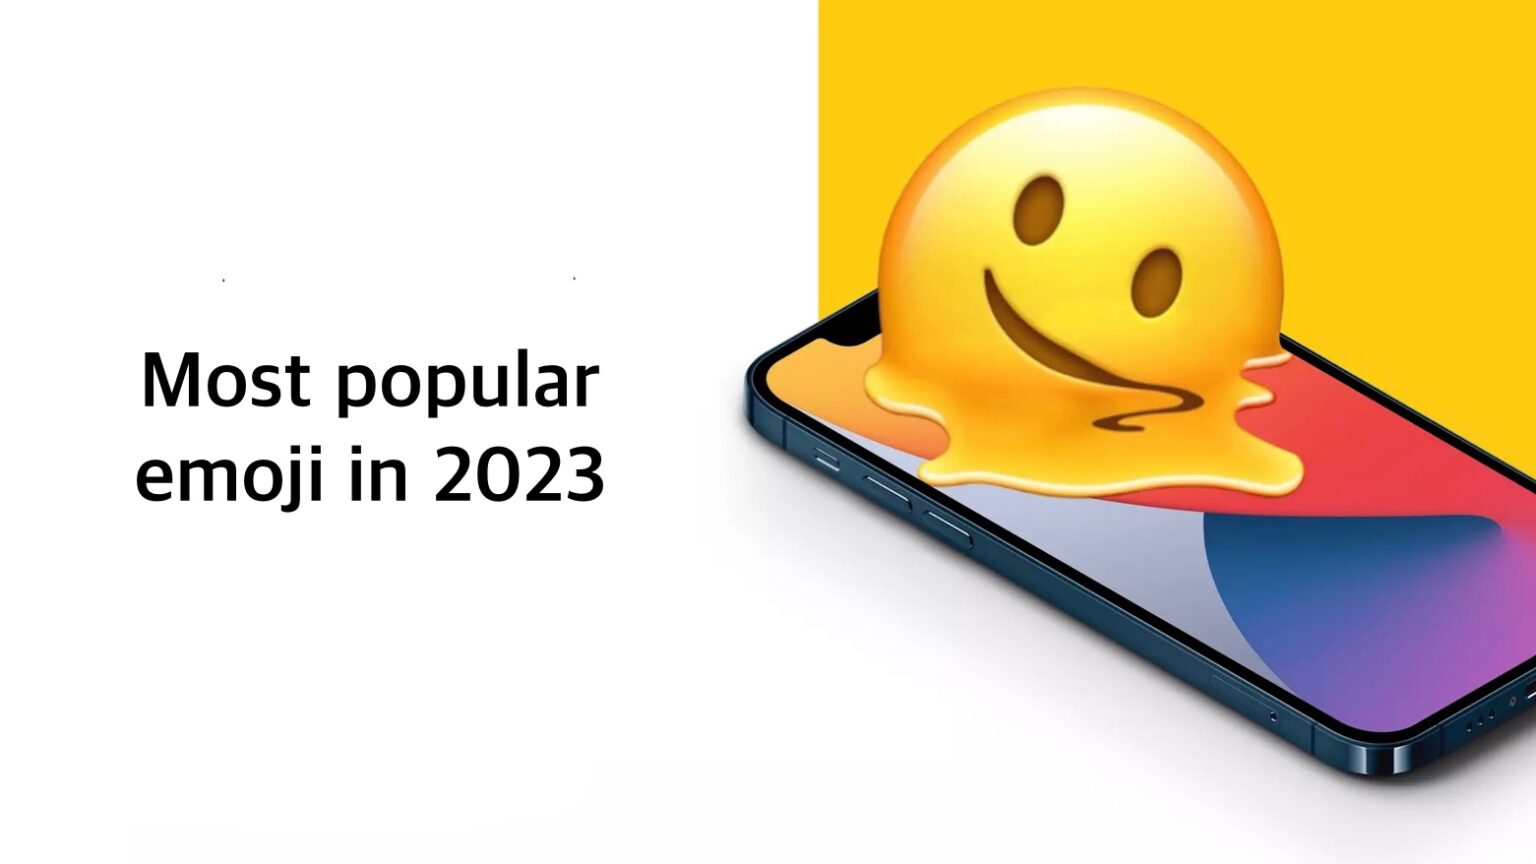 You’ll laugh and cry at the most popular emoji on World Emoji Day